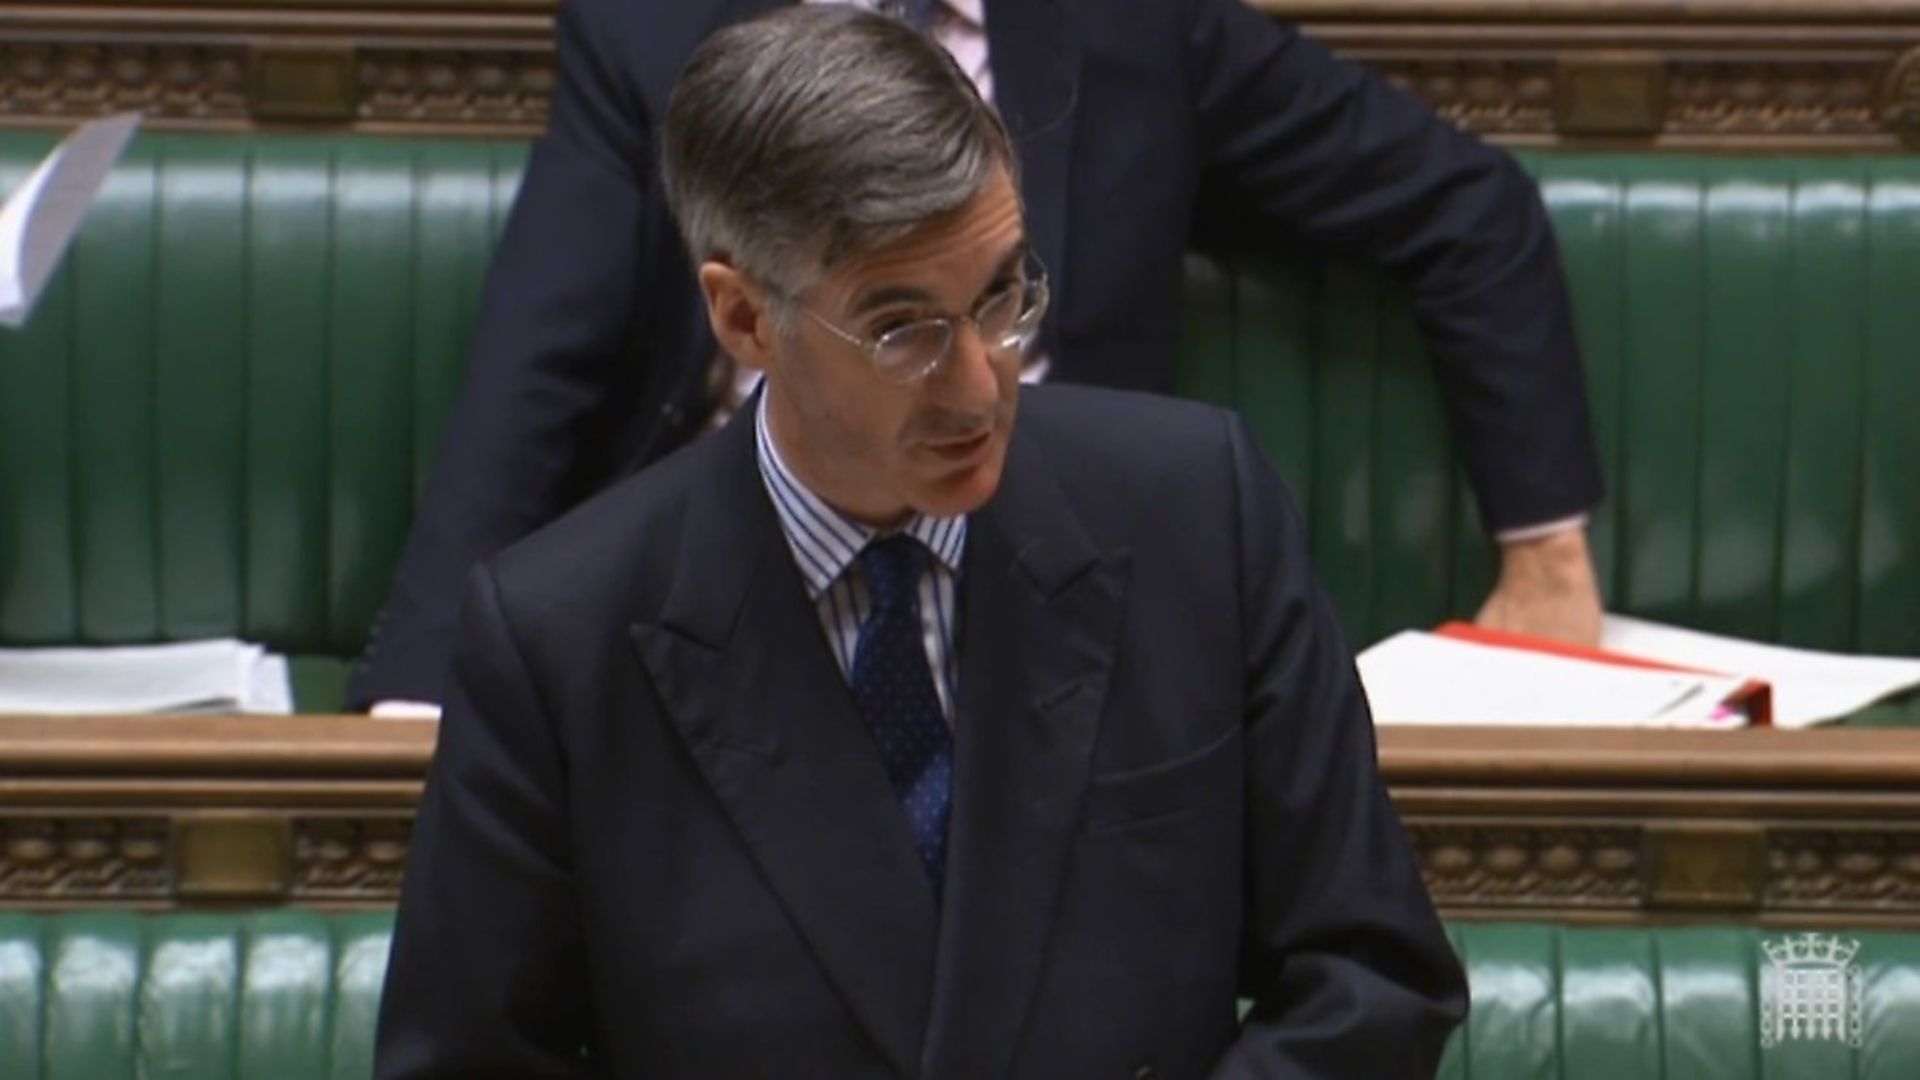 Jacob Rees-Mogg in the House of Commons. Photograph: Parliament TV. - Credit: Archant